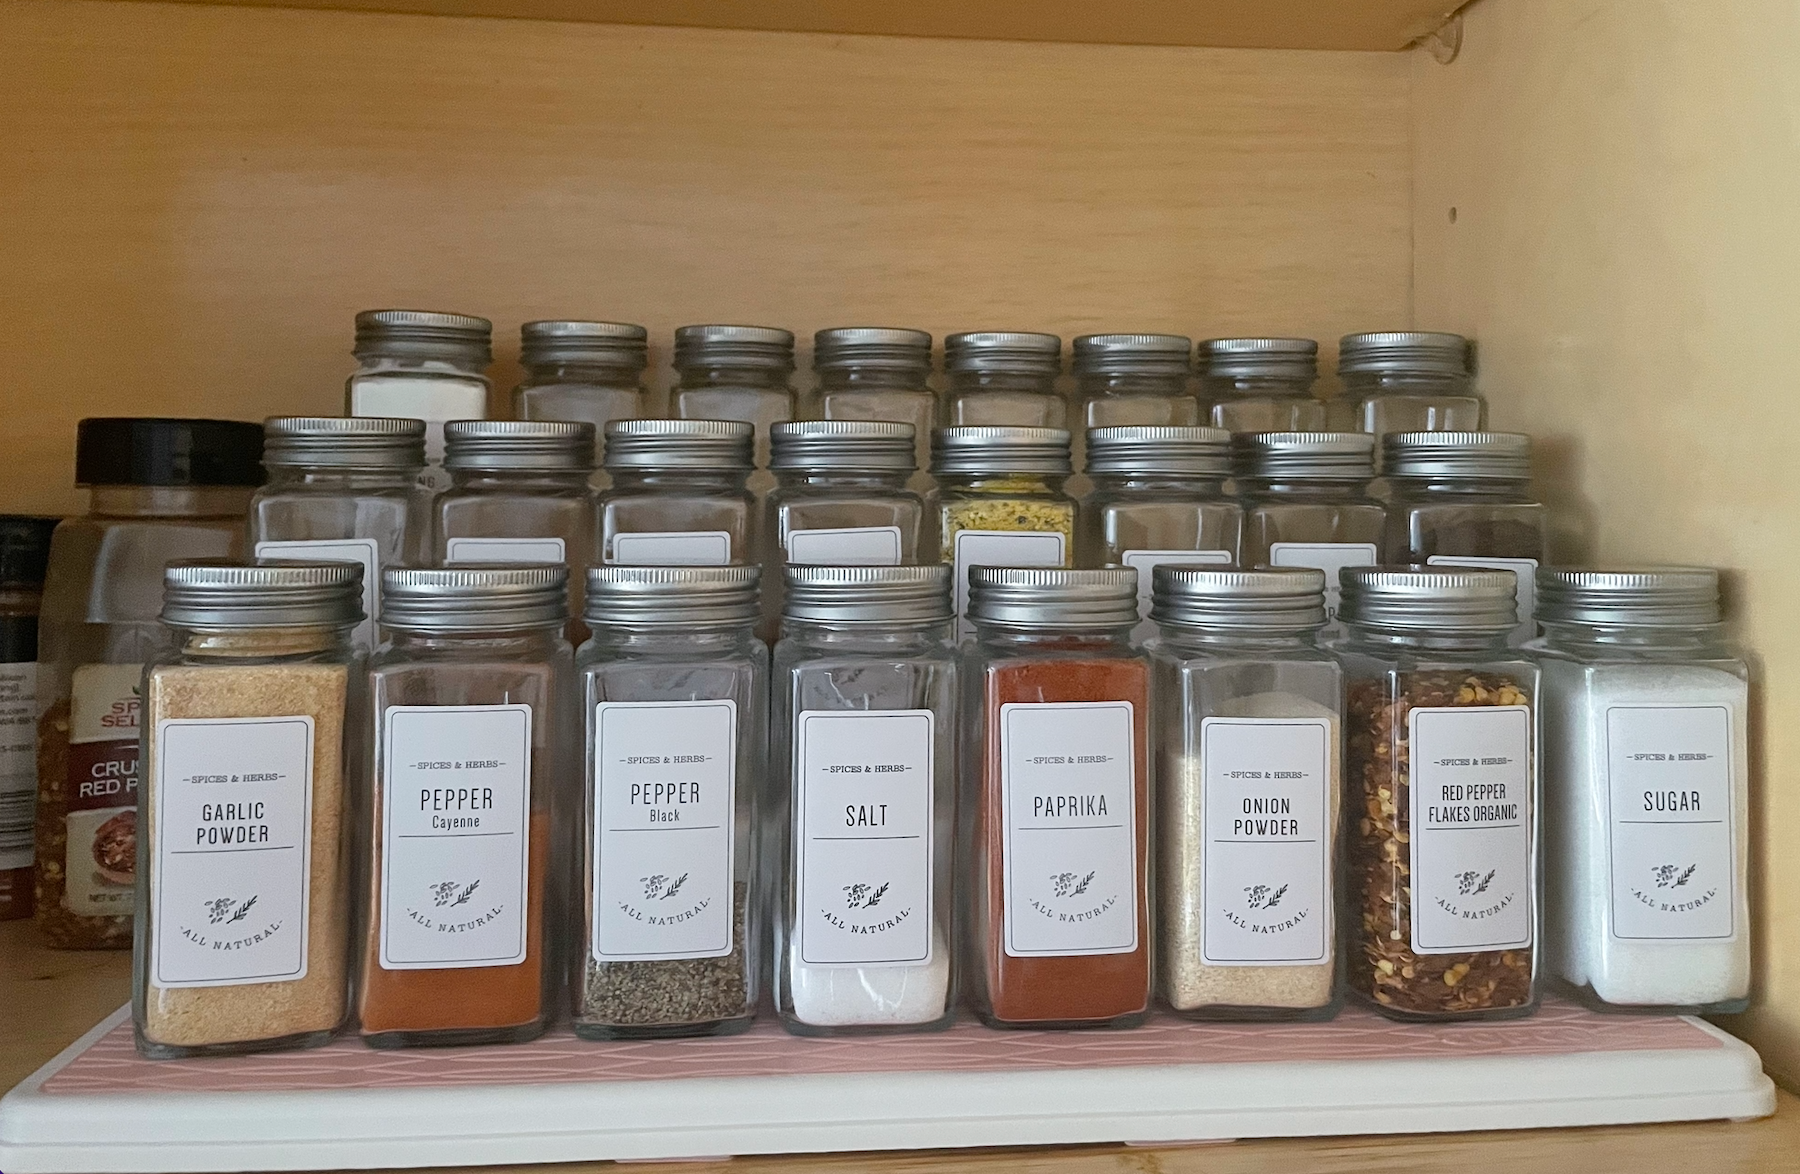 a buzzfeeder's pink and white pantry organizer holding various spice bottles